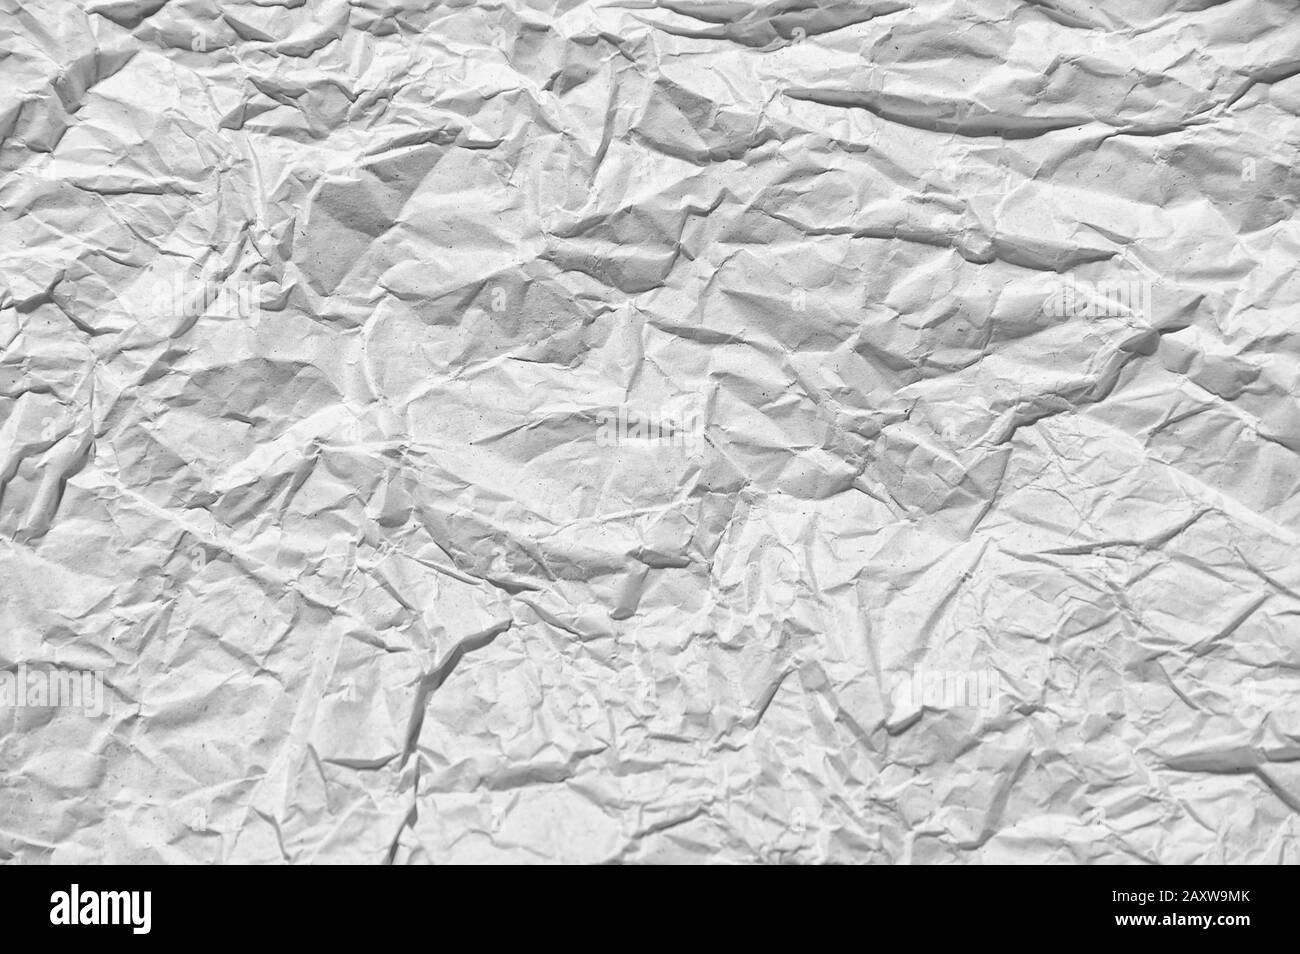 White crumpled paper texture background, simple paper surface used as backdrop overlay or products design Stock Photo